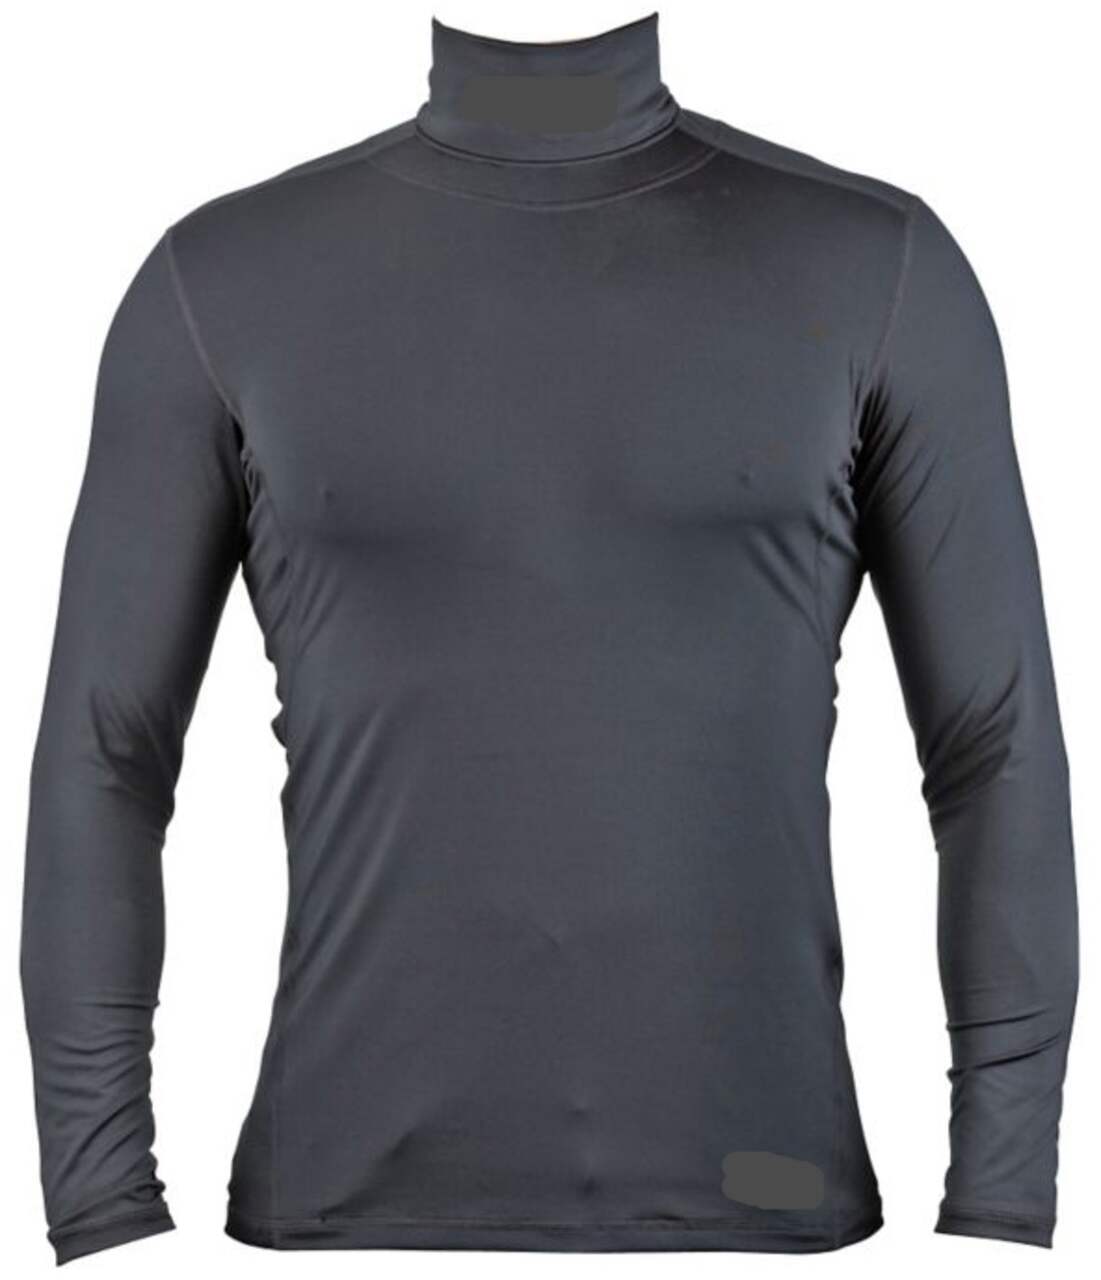 Sherwood Hockey Long Sleeve Top with Integrated Neck Guard, Youth